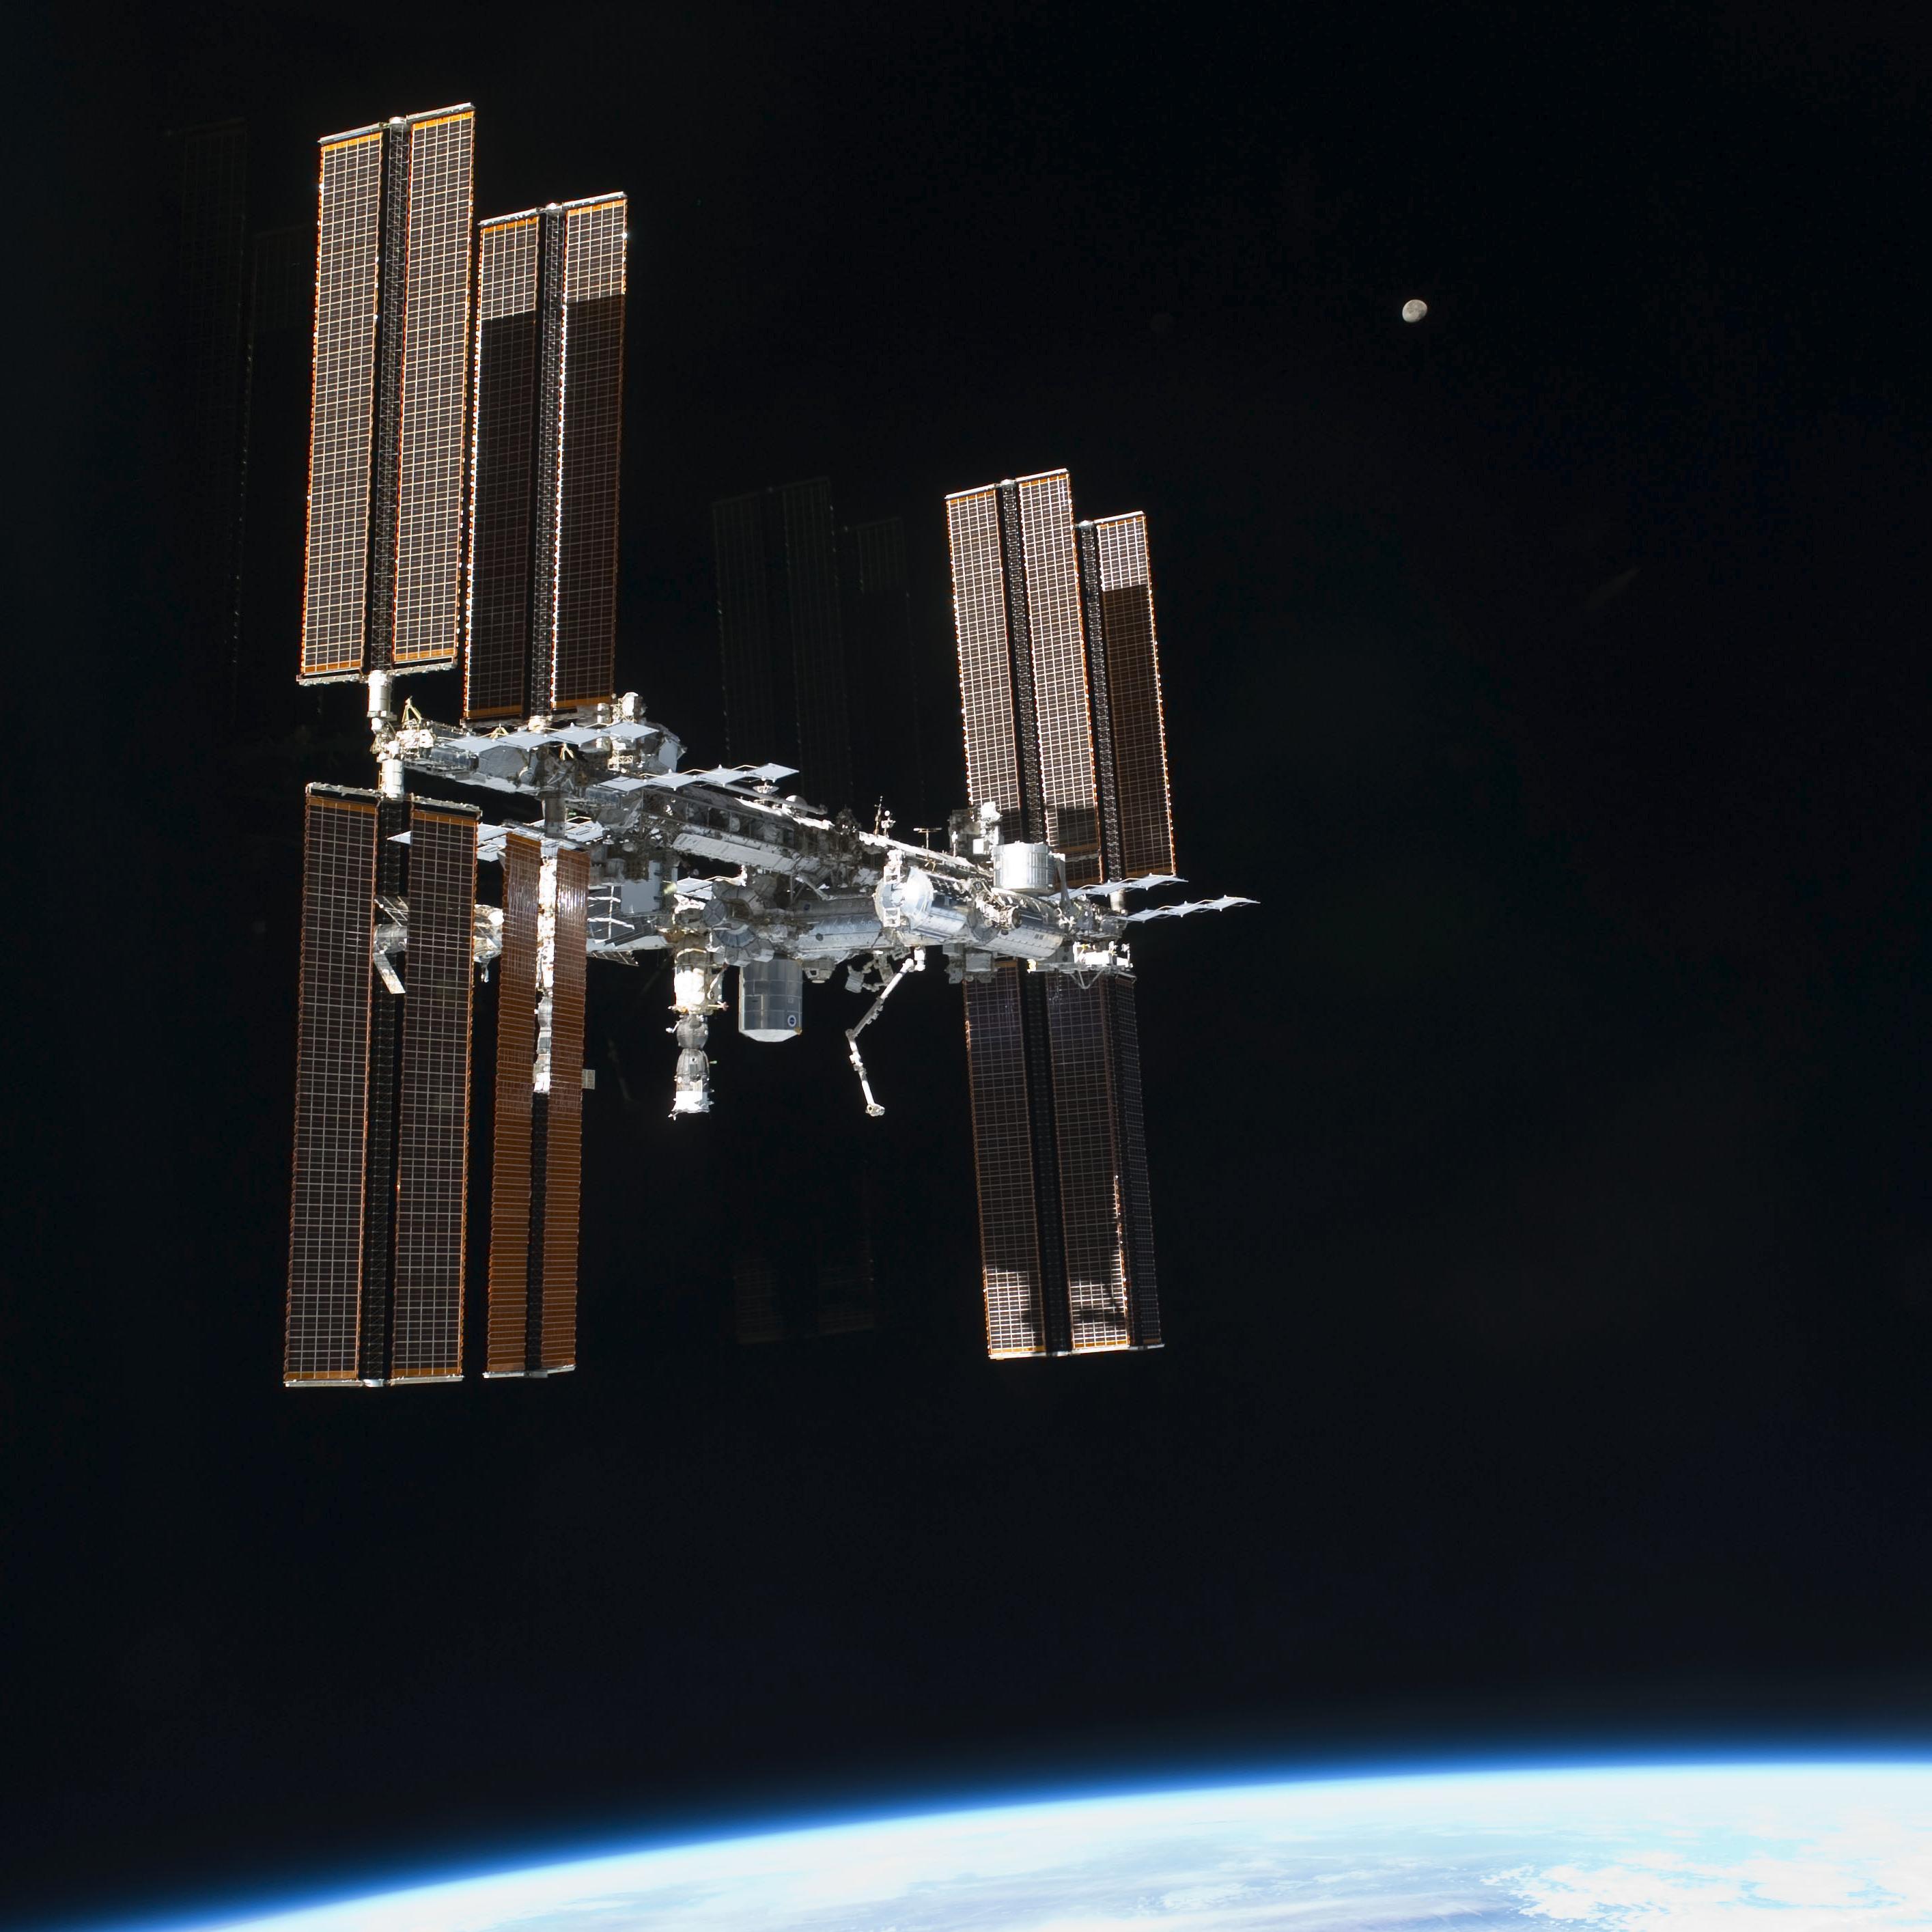 Connecting Earth with the ISS through Amateur Radio